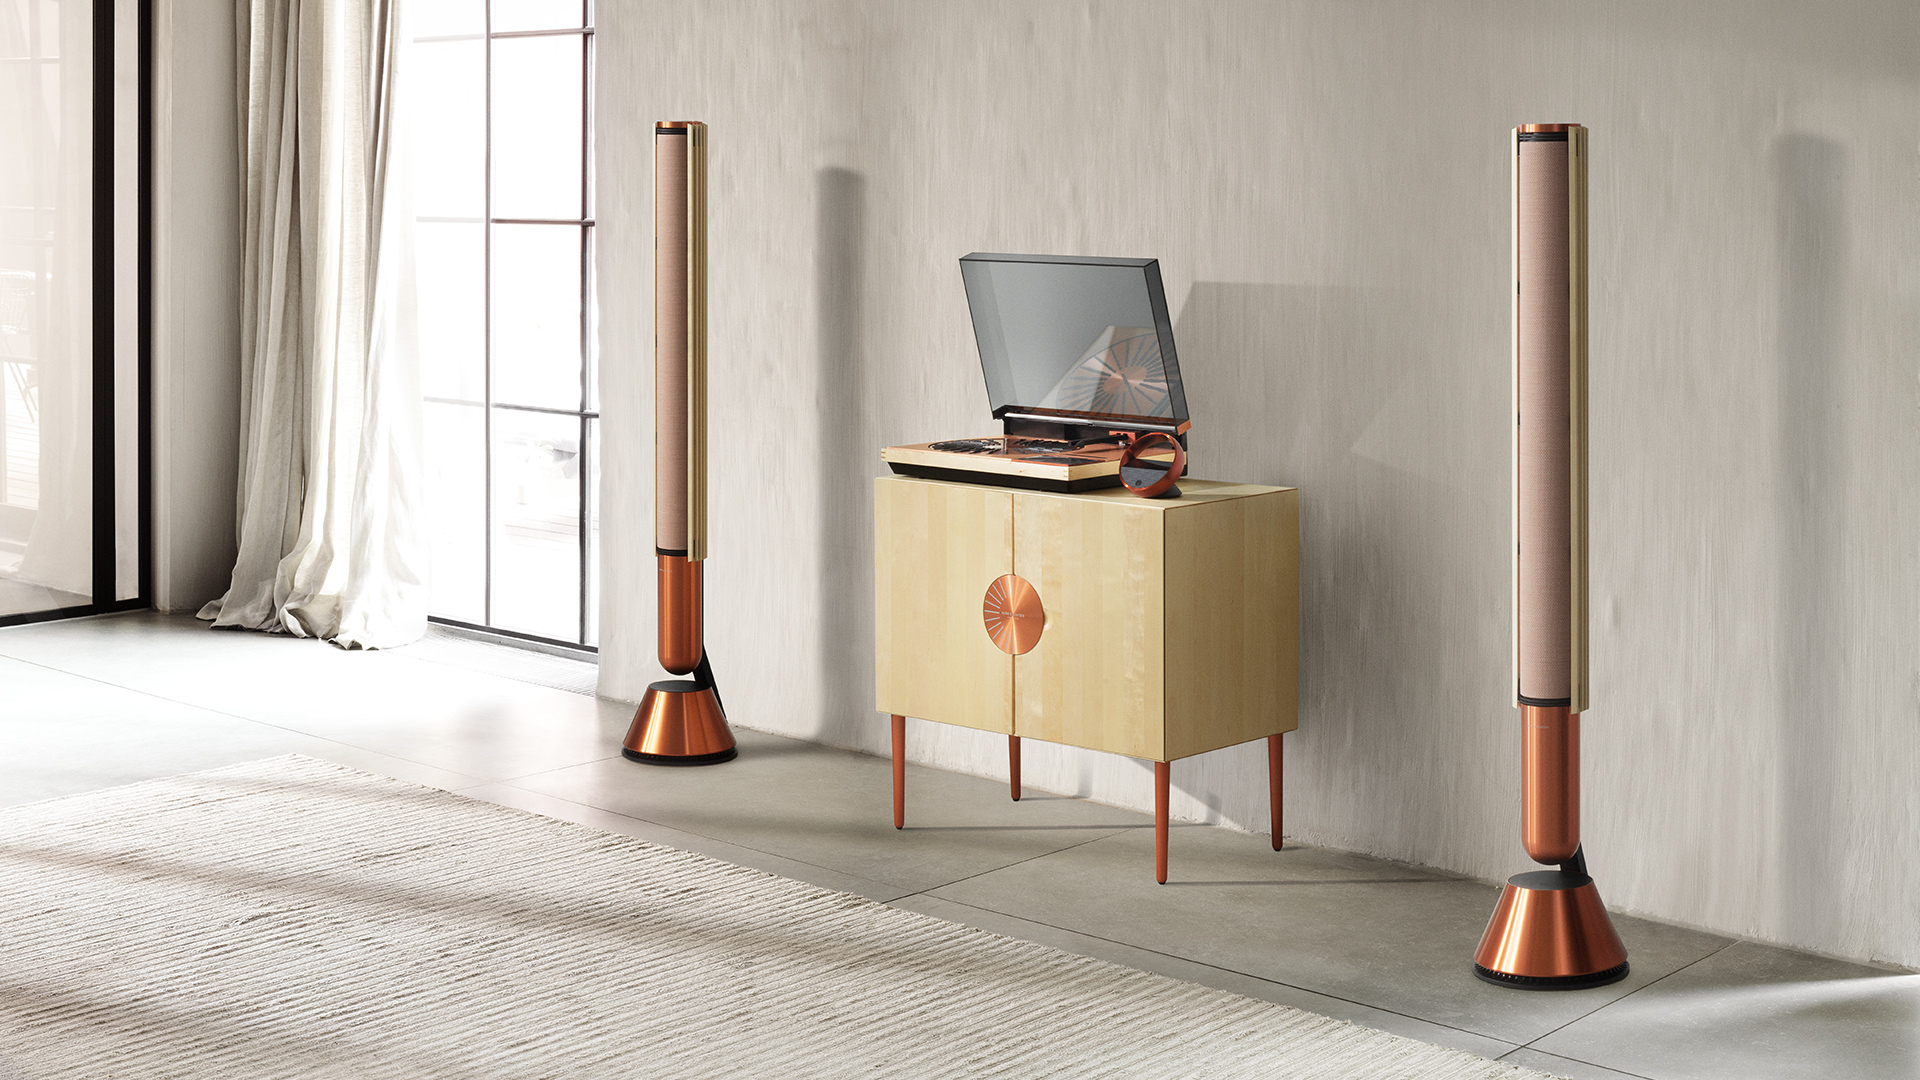 A Music Lover's Dream: Bang & Olufsen Speakers, in the Colors of